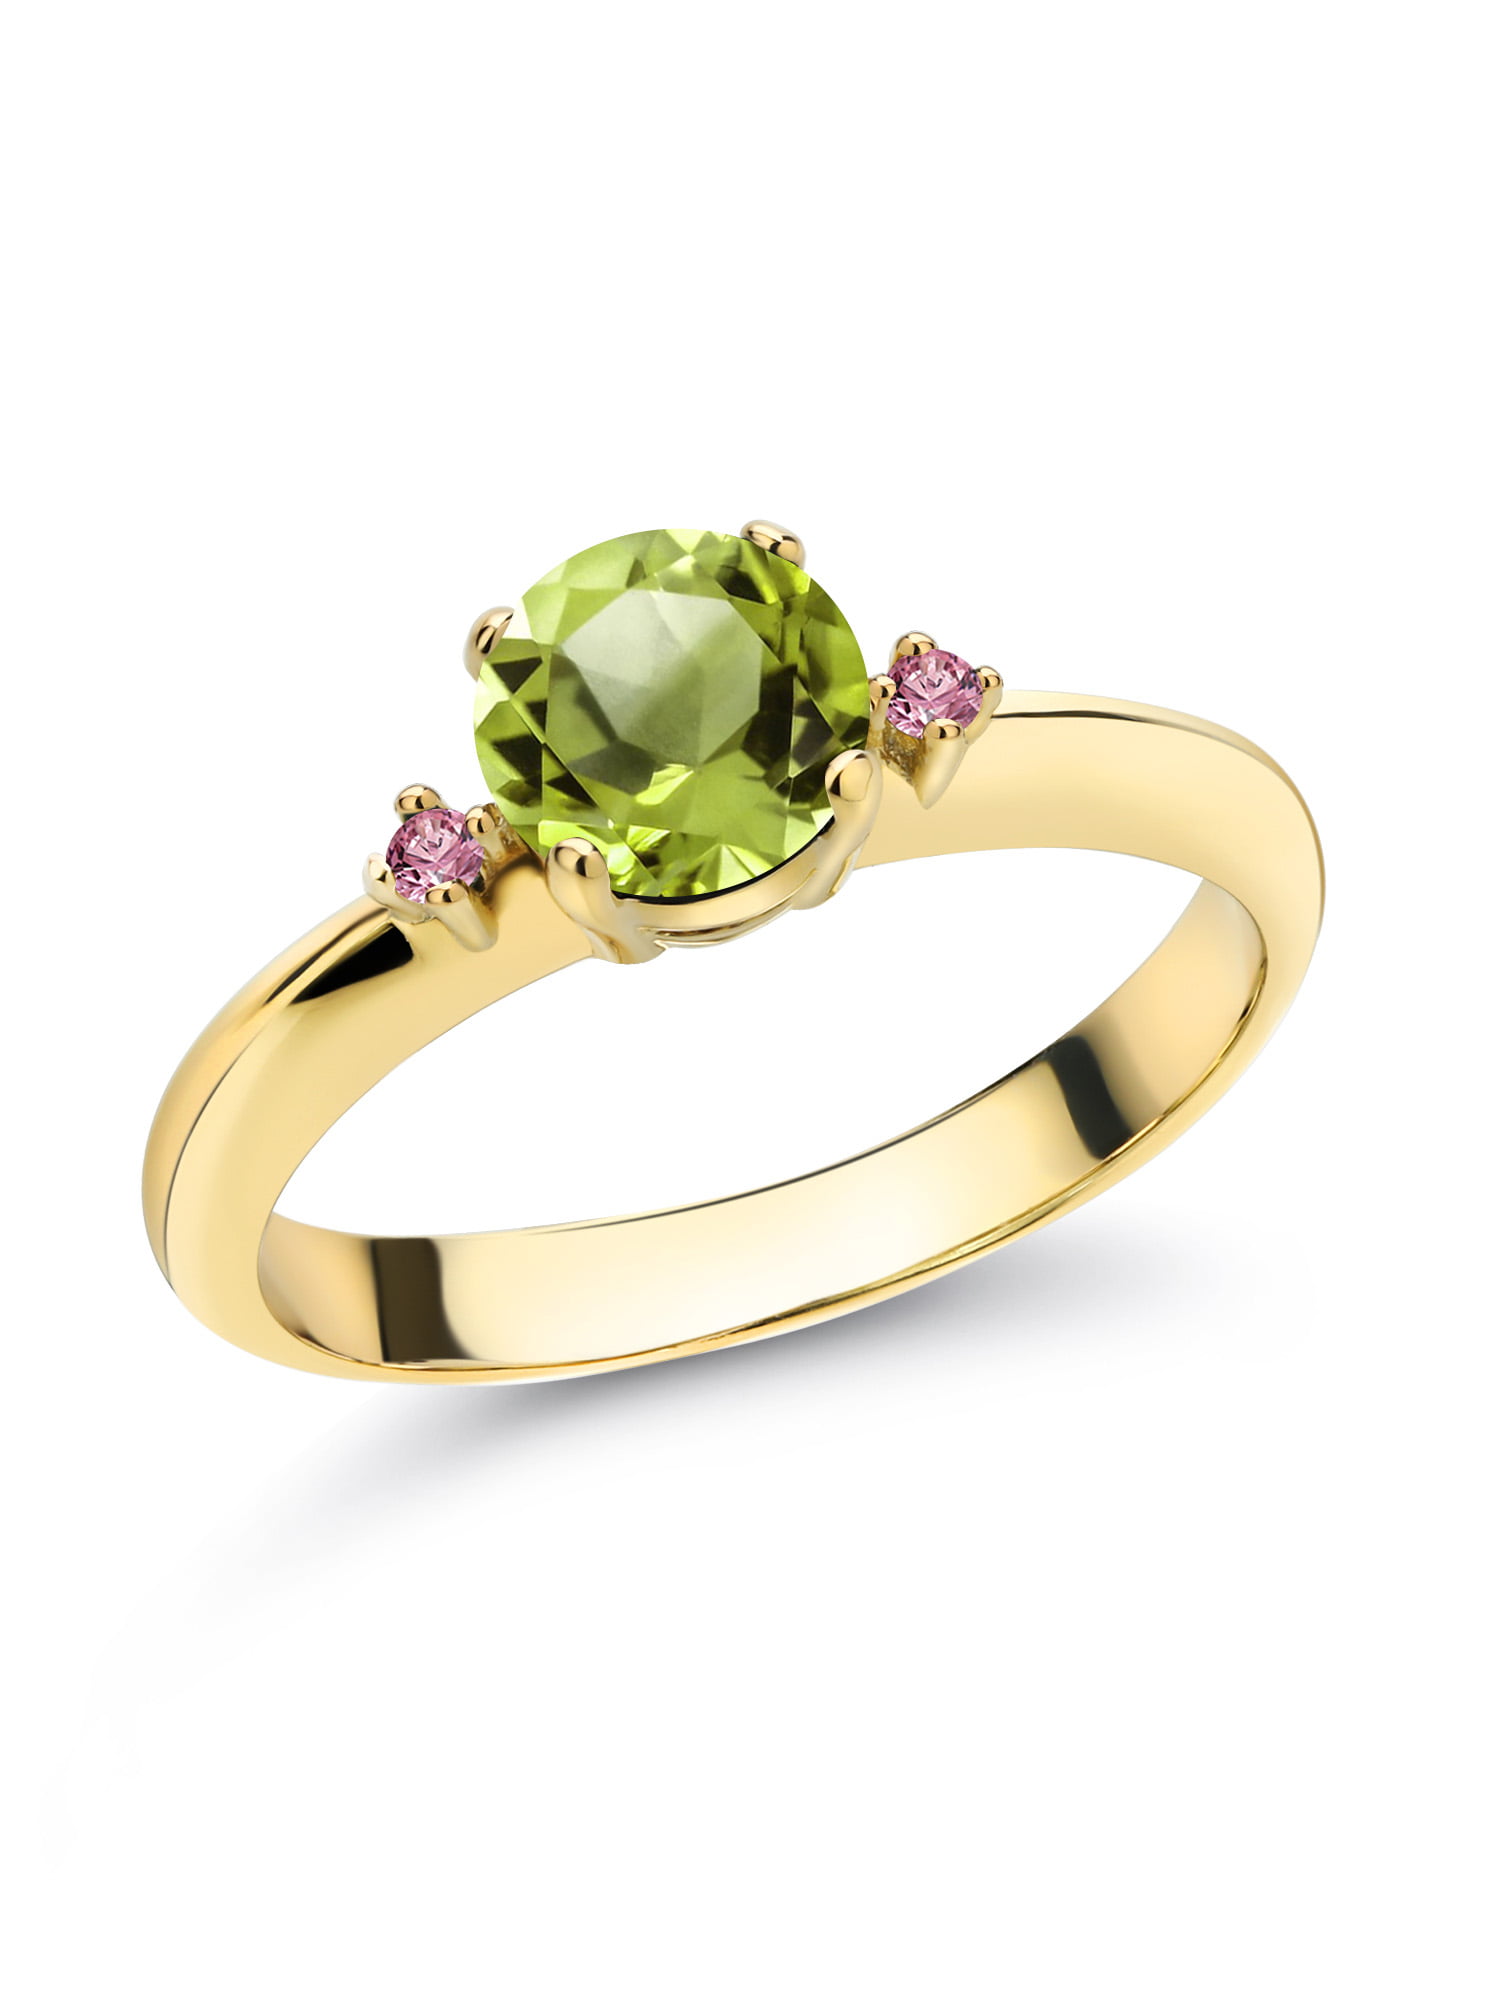 14K Gold Plated Green Peridot & White Cubic Zirconia Ladies 3 Stone Halo Bridal Engagement Ring with Matching Band Set